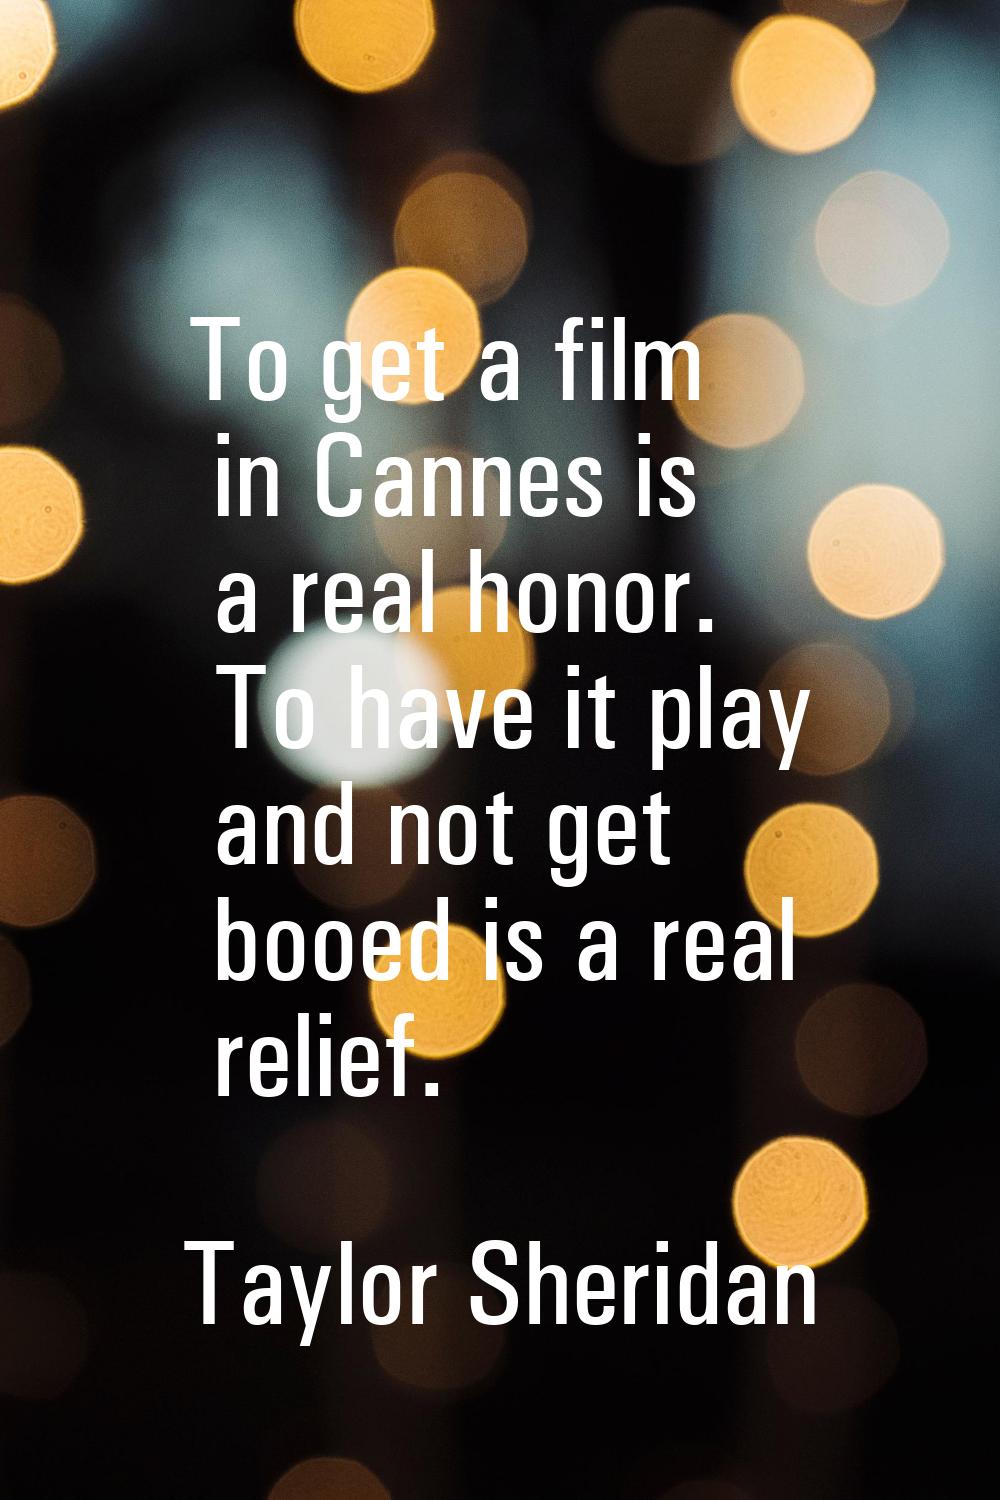 To get a film in Cannes is a real honor. To have it play and not get booed is a real relief.